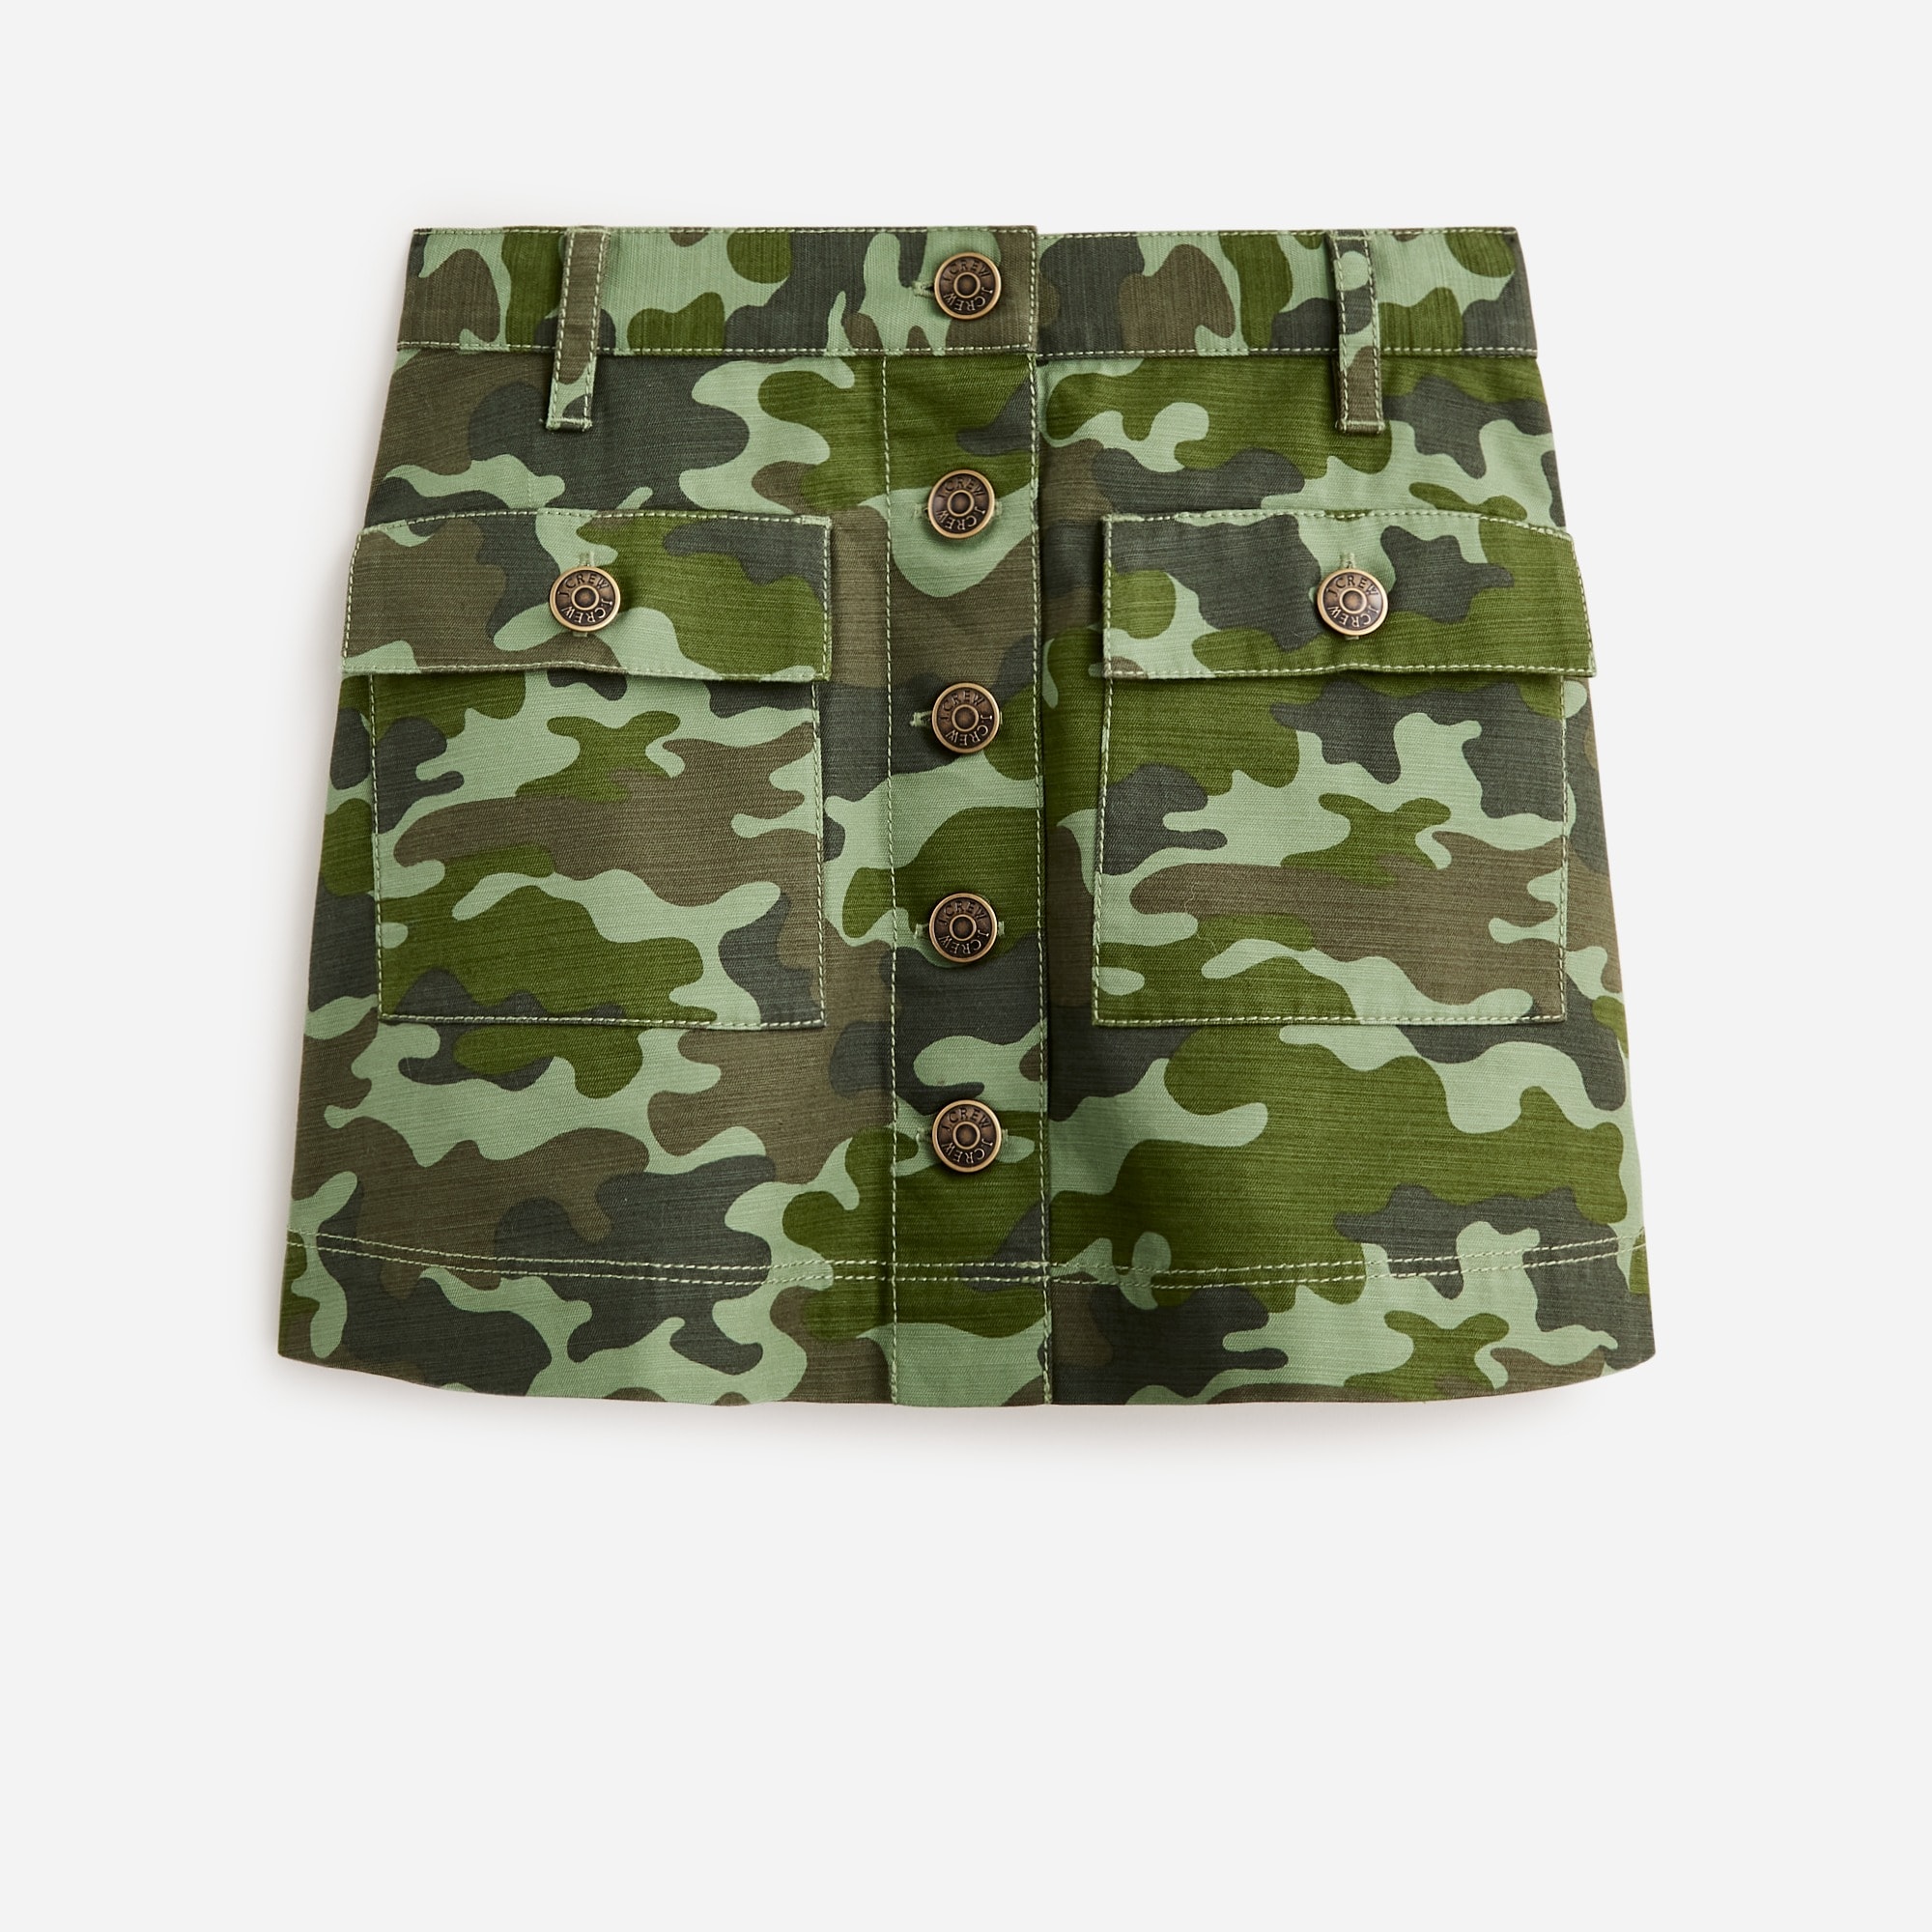 Jcrew Girls button-front skirt in camouflage